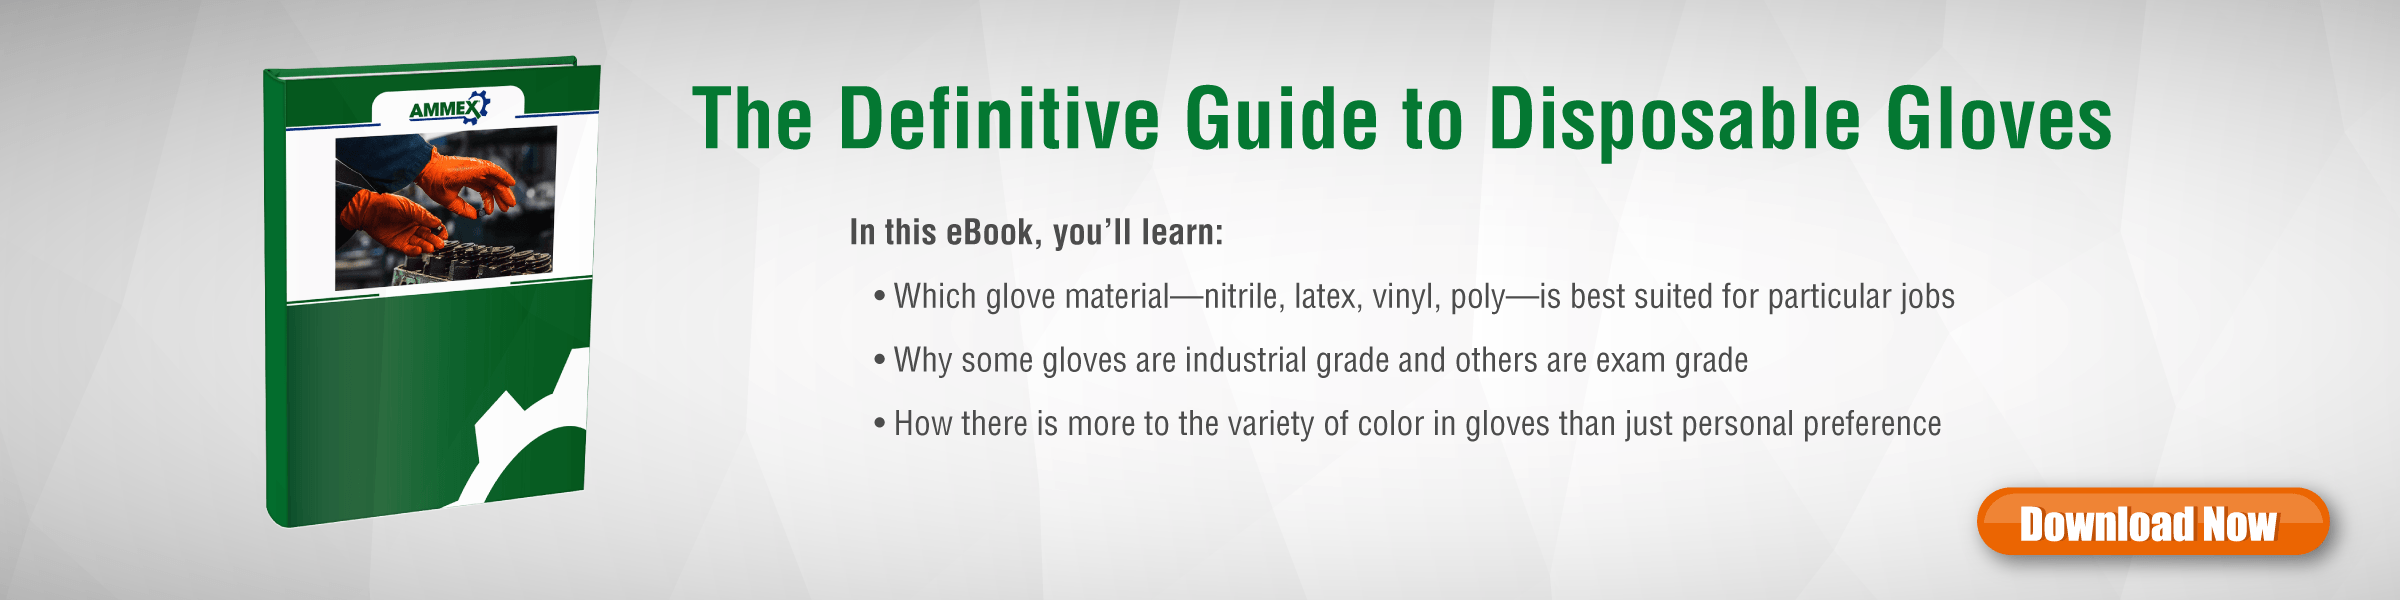 the definitive guide to disposable gloves free ebook download